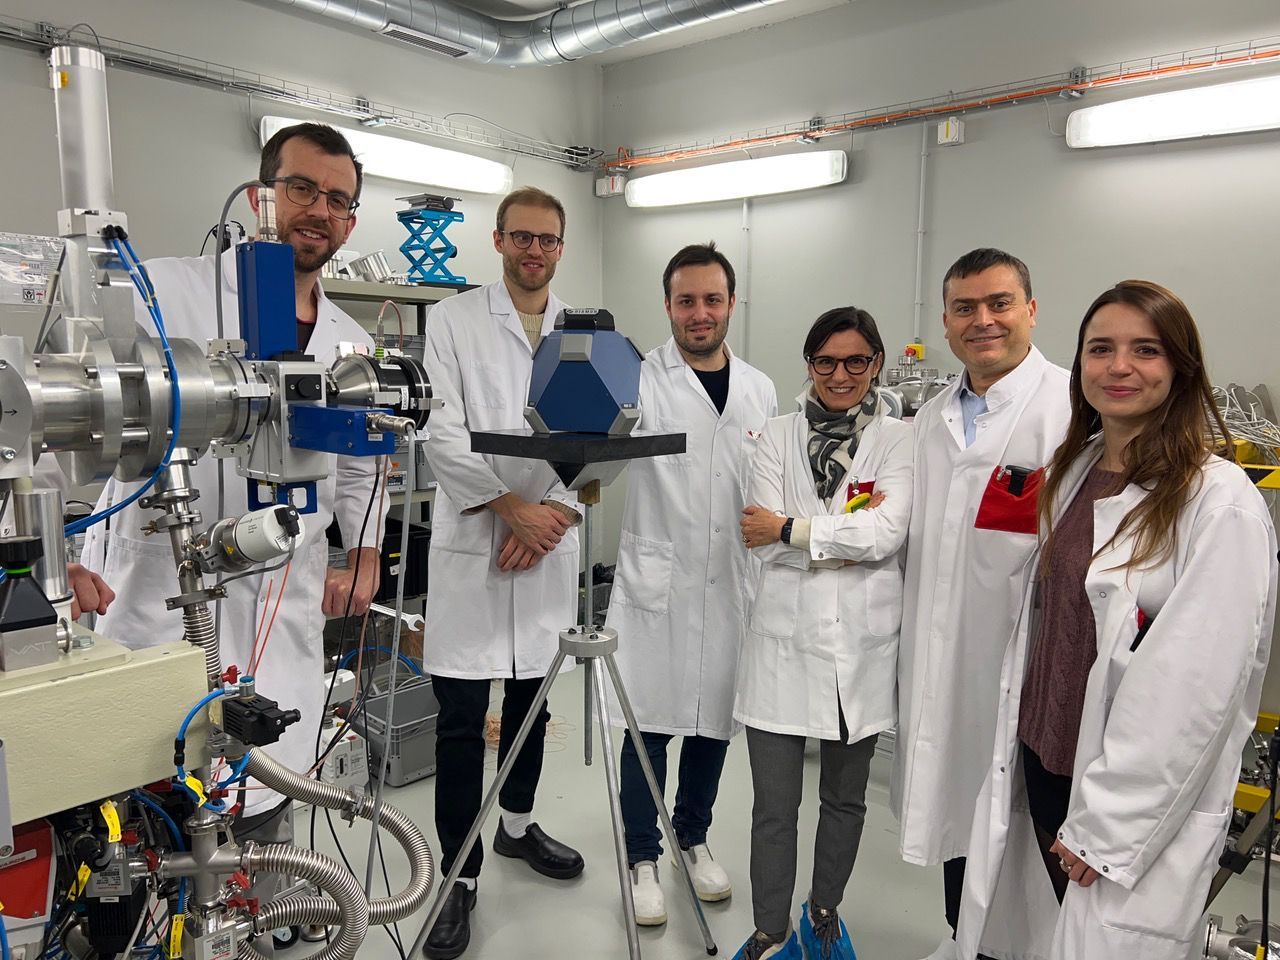 The team at the University of Bern has successfully tested the DIAMON spectrometer